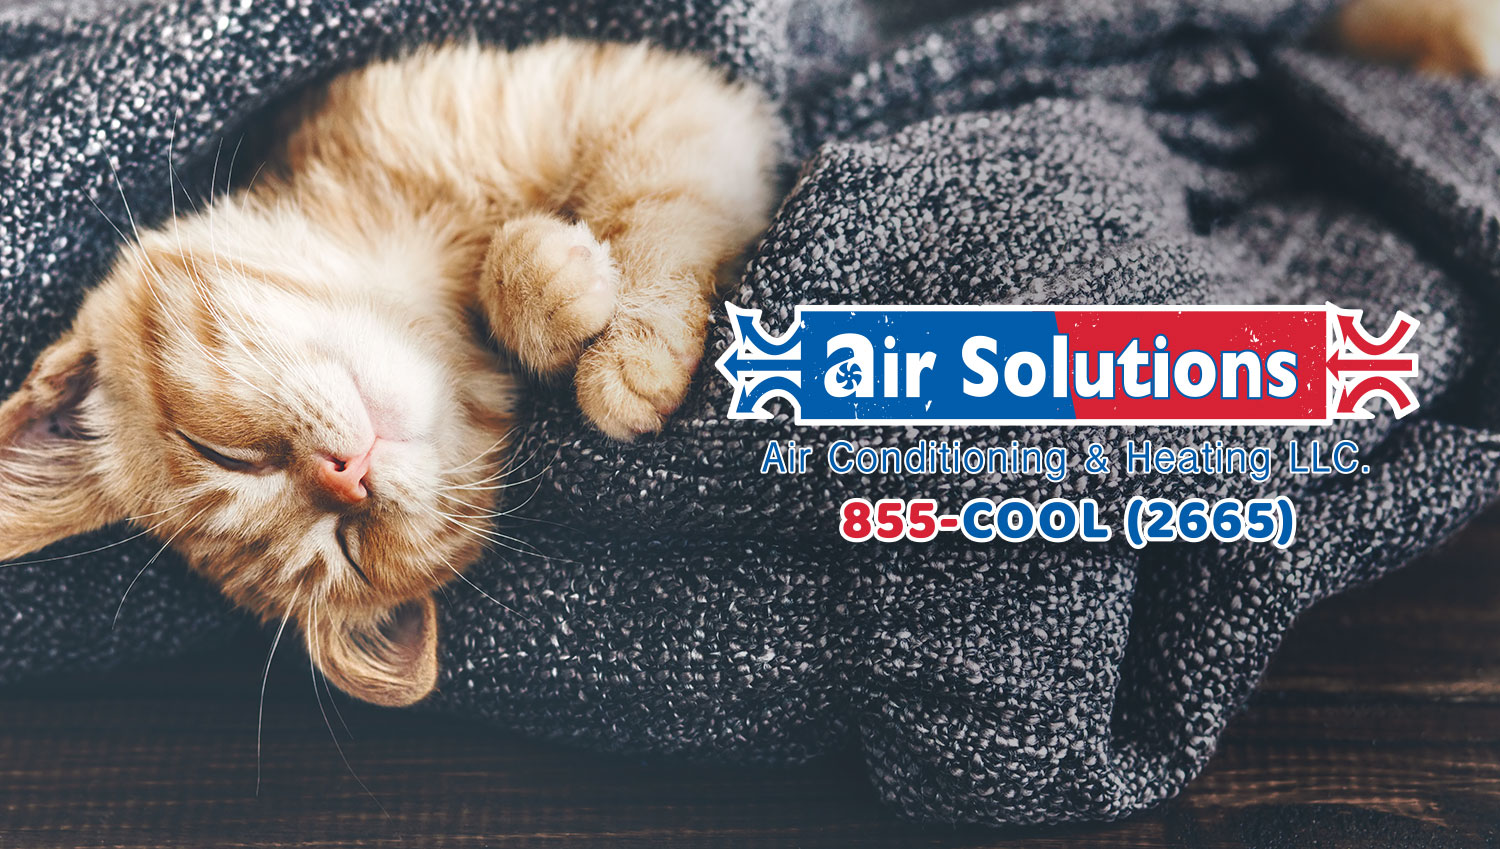 Air Solutions Heating & Air Conditioning | Foster Design Co.